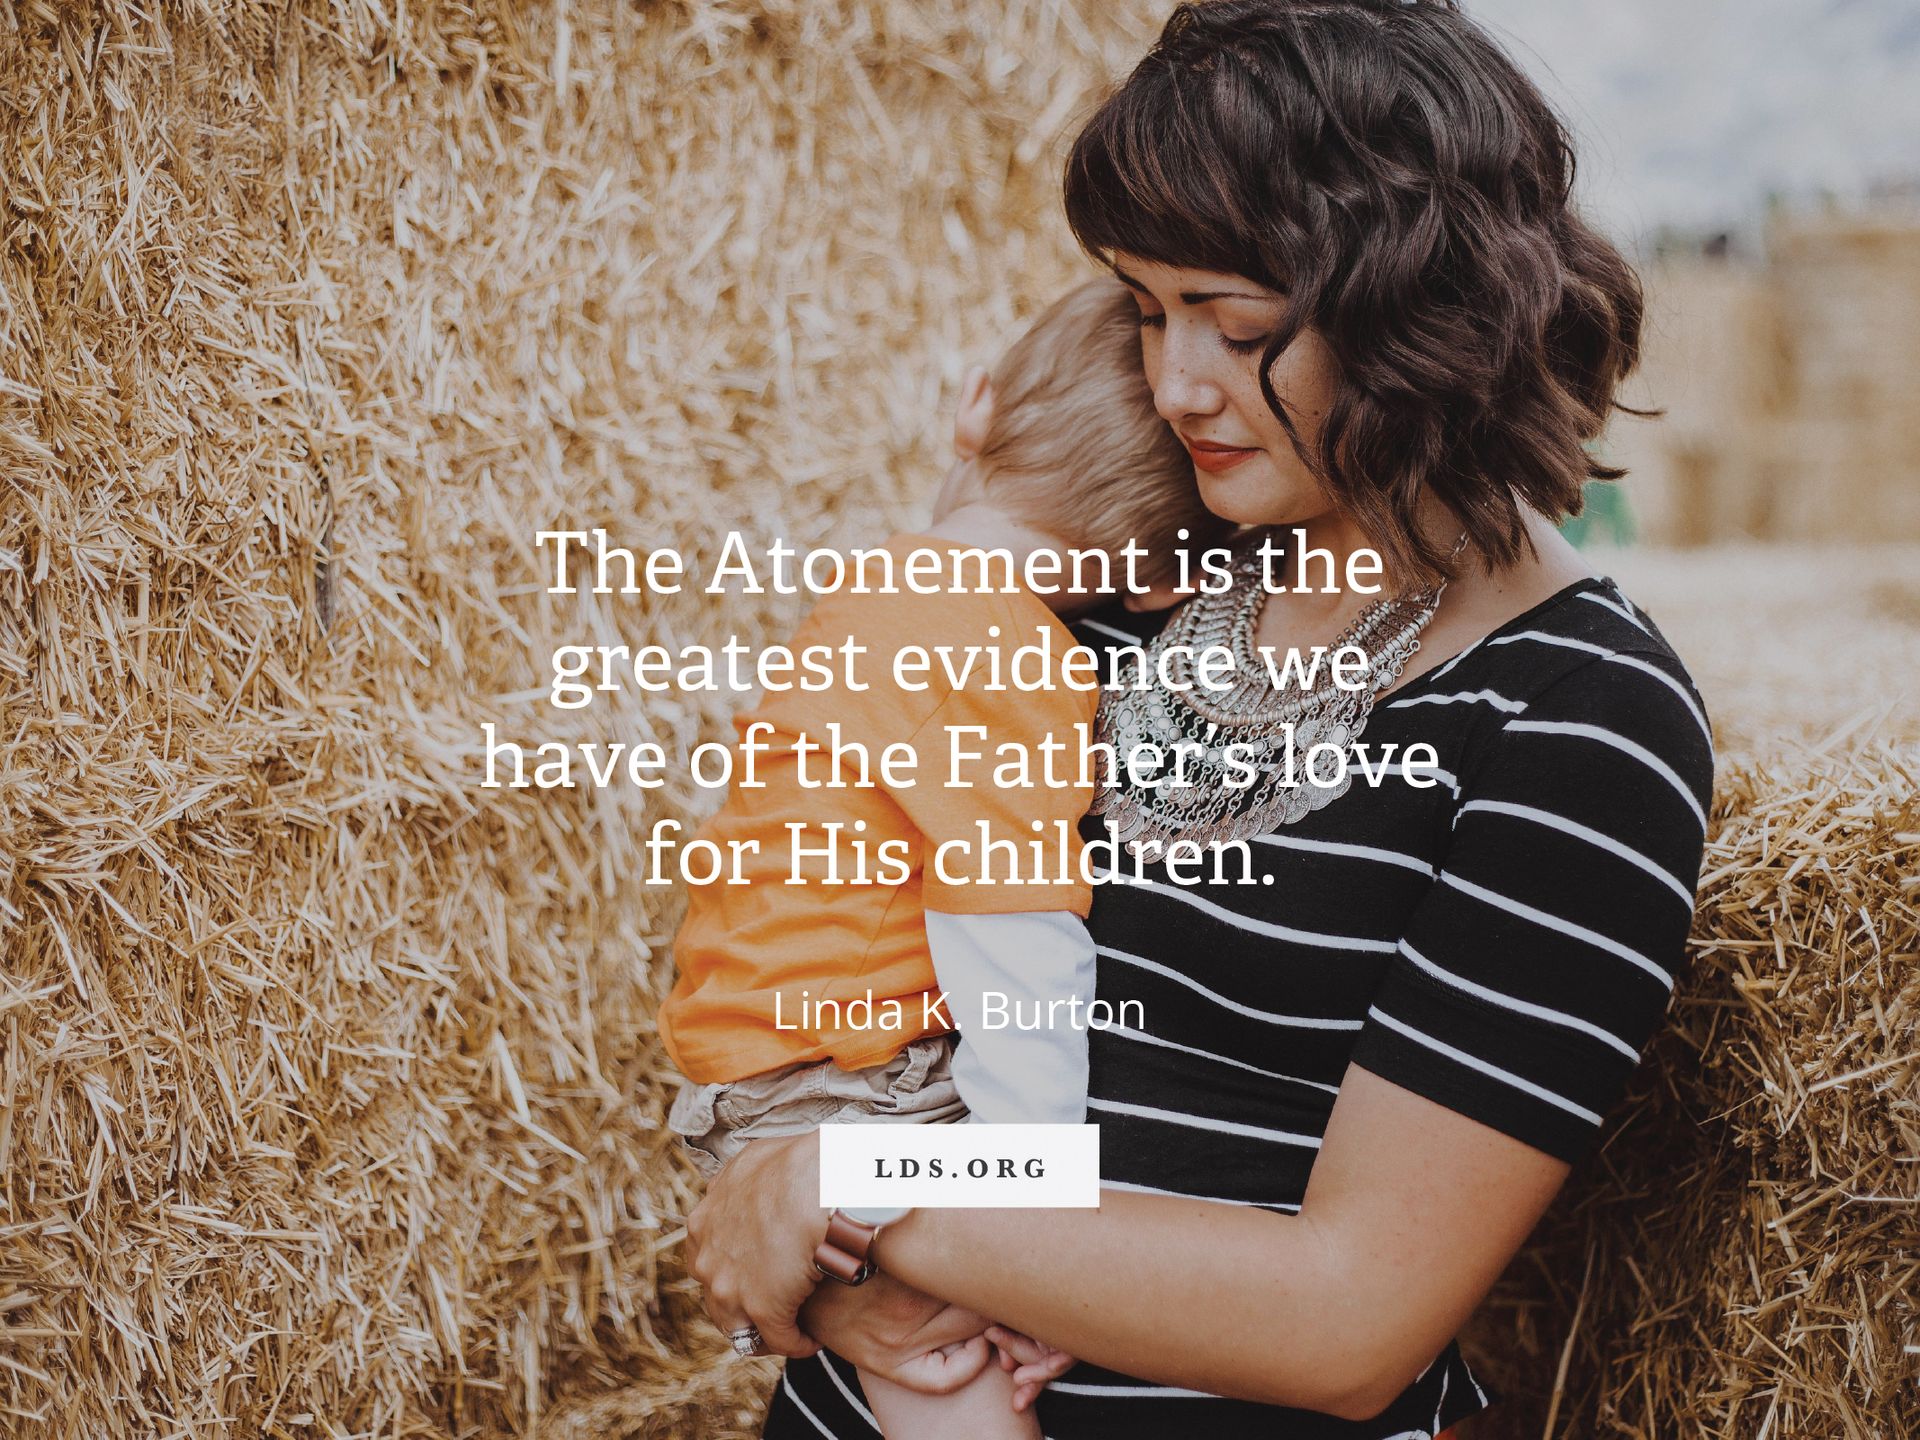 “The Atonement is the greatest evidence we have of the Father’s love for His children.” —Linda K. Burton, “Is Faith in the Atonement of Jesus Christ Written in Our Hearts?”